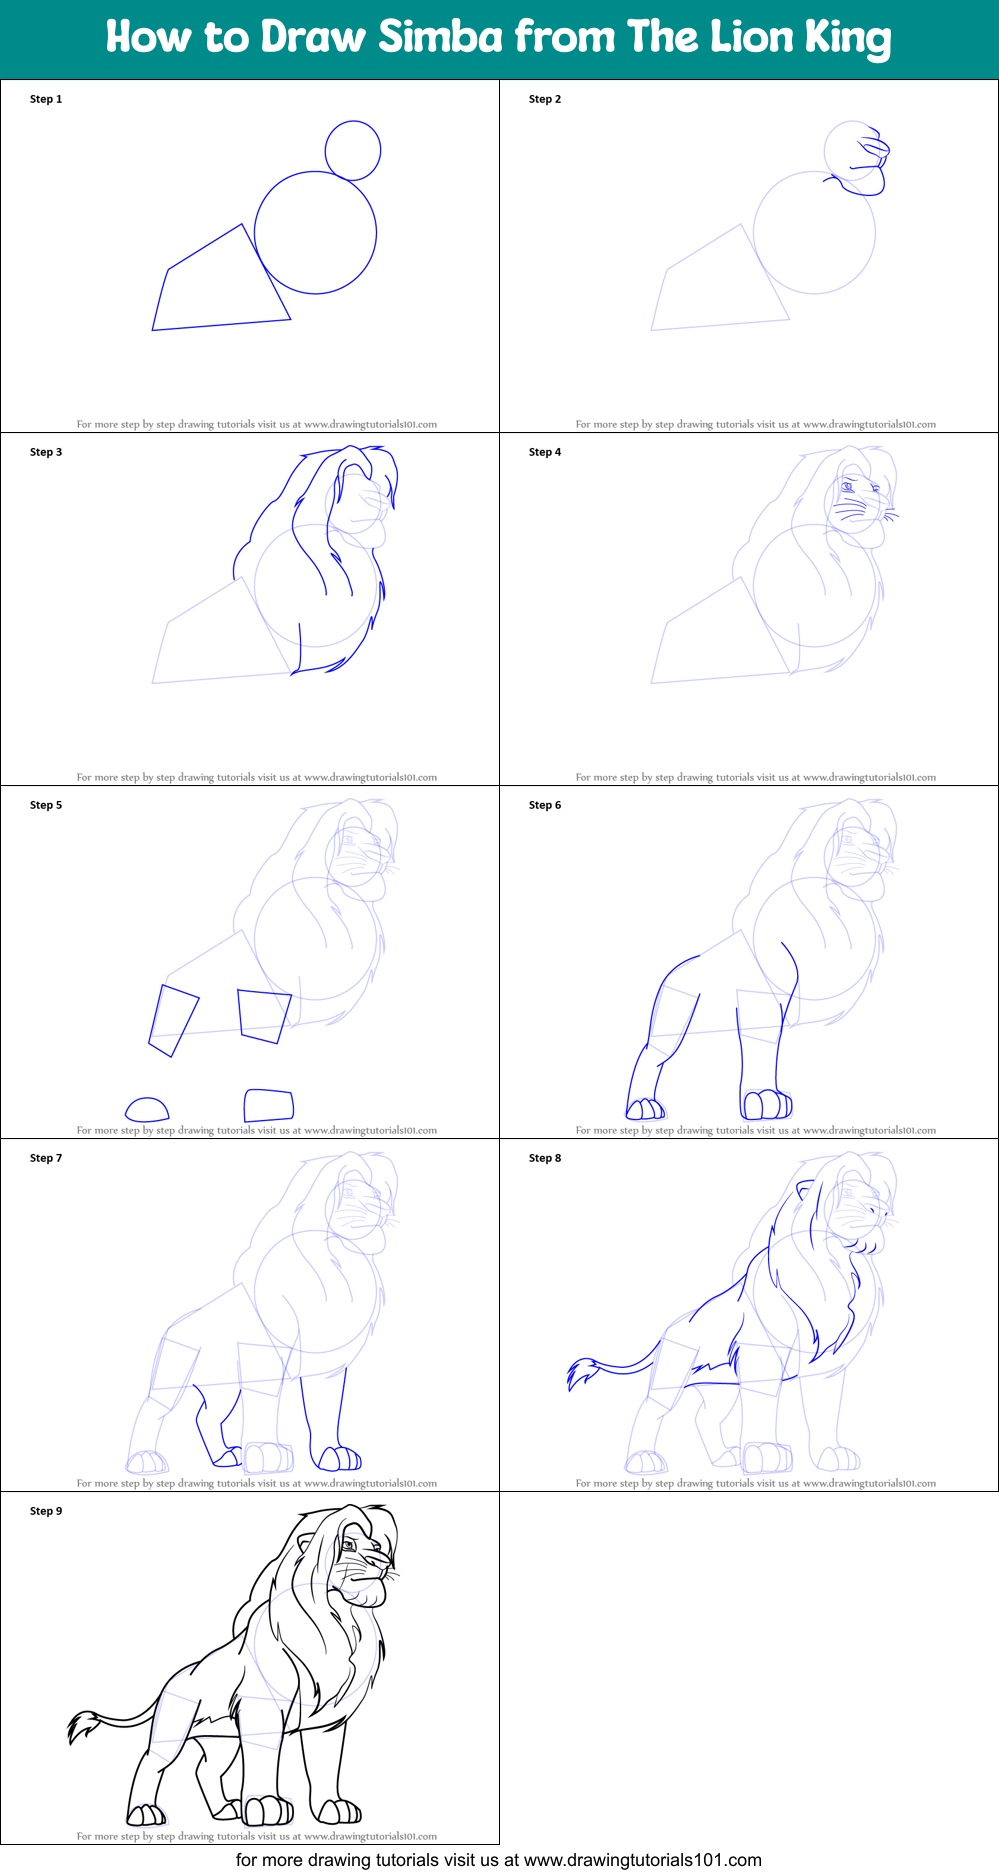 How to Draw Simba from The Lion King printable step by step drawing